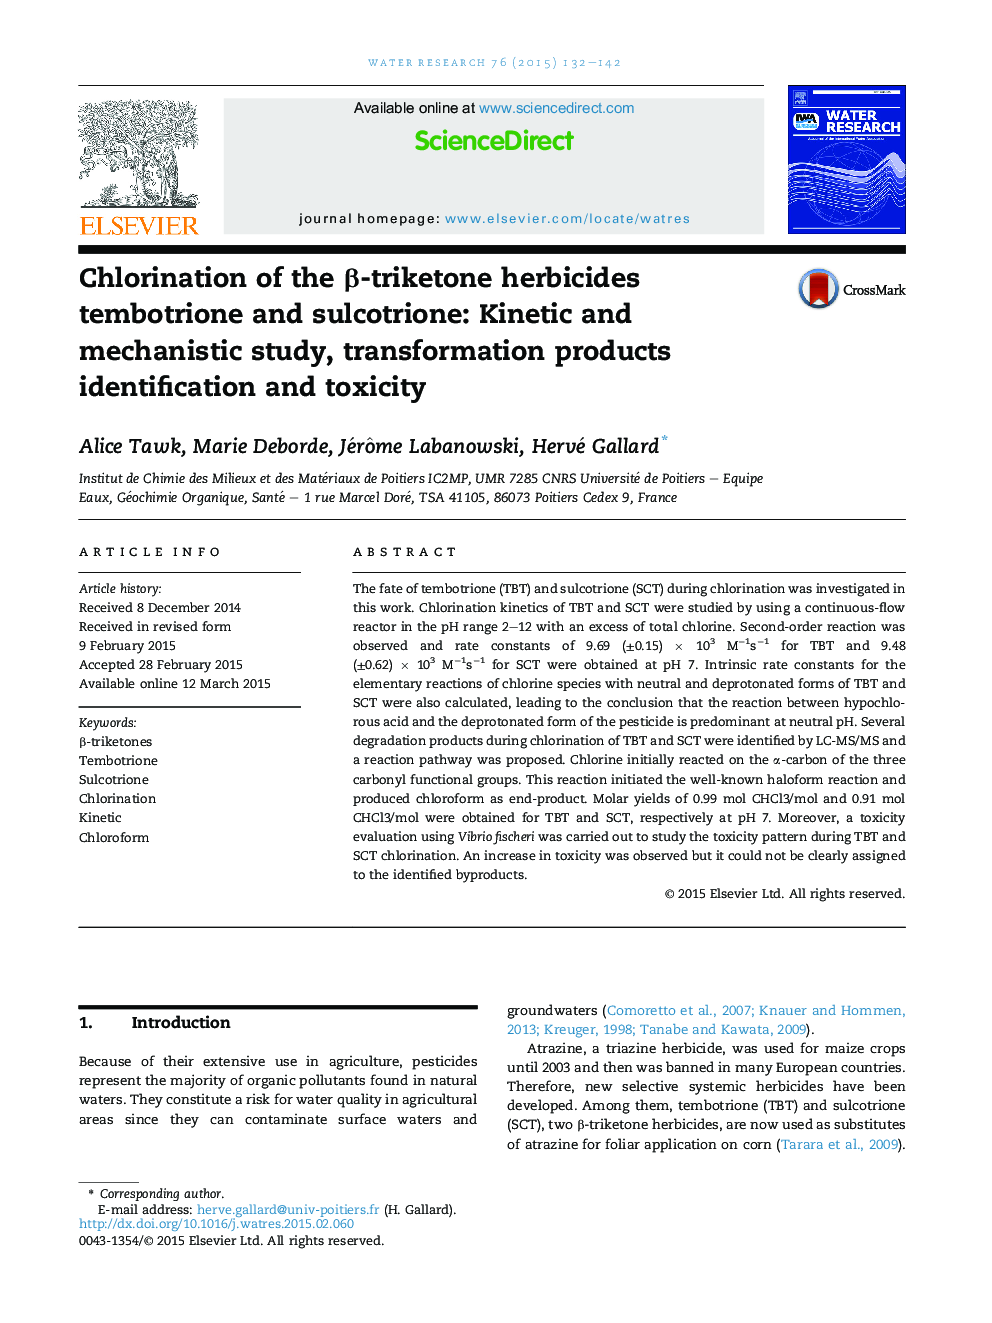 Chlorination of the Î²-triketone herbicides tembotrione and sulcotrione: Kinetic and mechanistic study, transformation products identification and toxicity